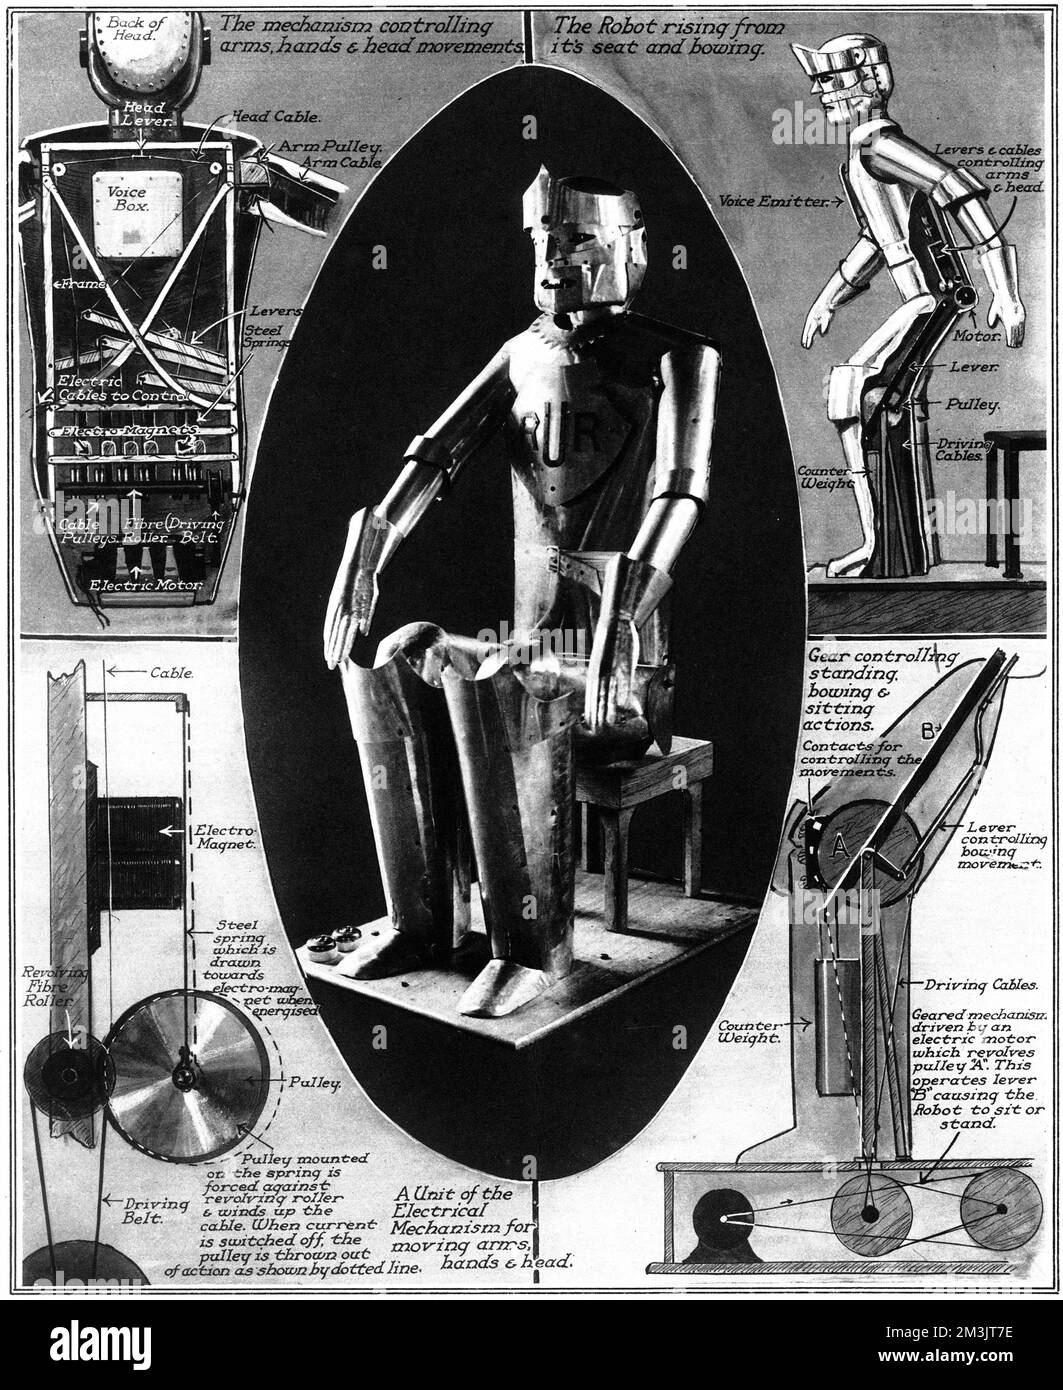 first robot ever invented